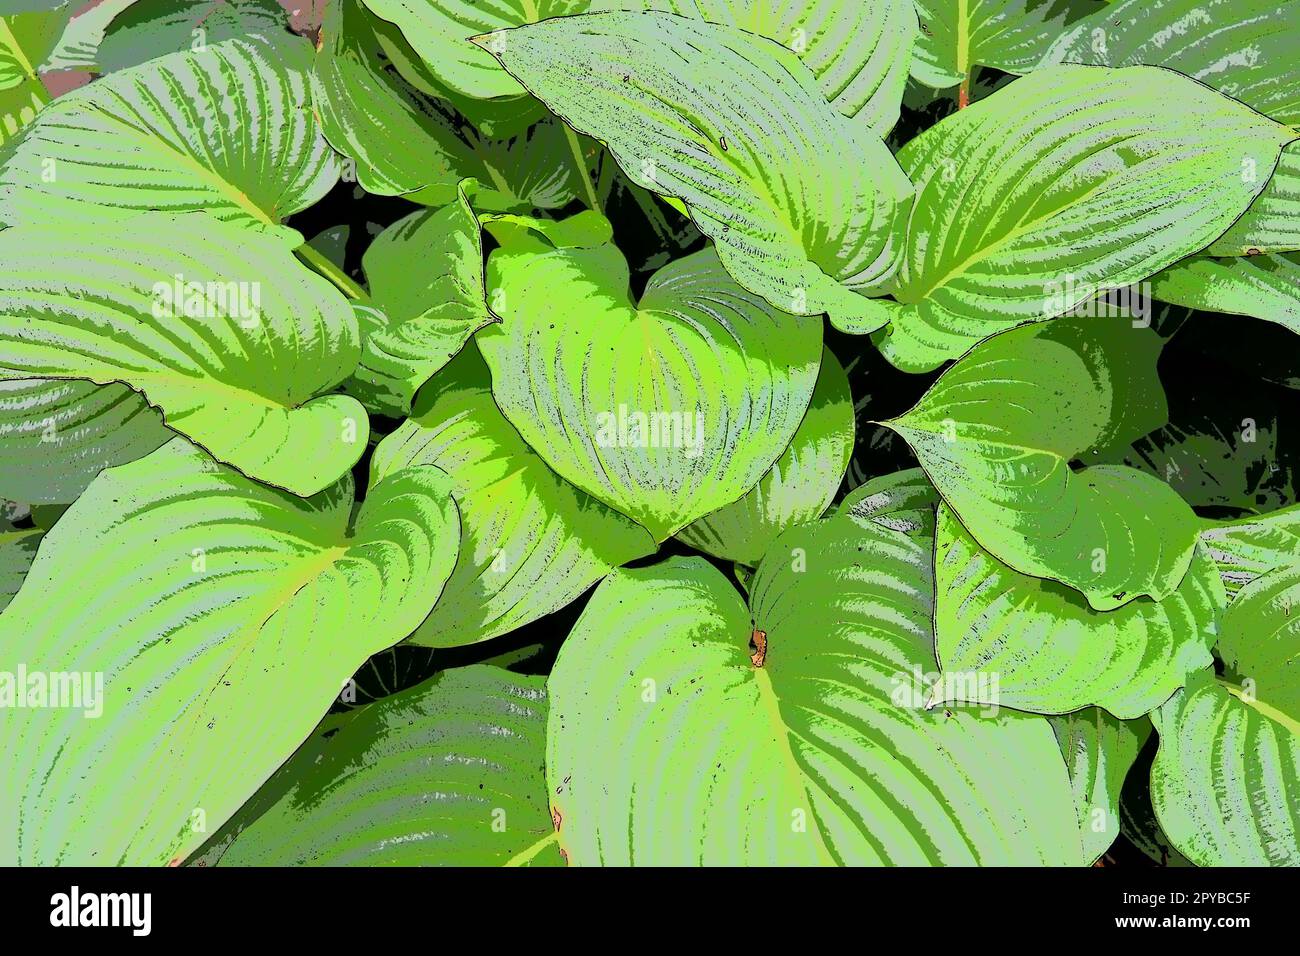 Hosta is a genus of perennial herbaceous plants in the family Asparagus formerly included in the family Liliaceae. Large hosta leaves. Floriculture and landscape design. Monochrome green tone Stock Photo